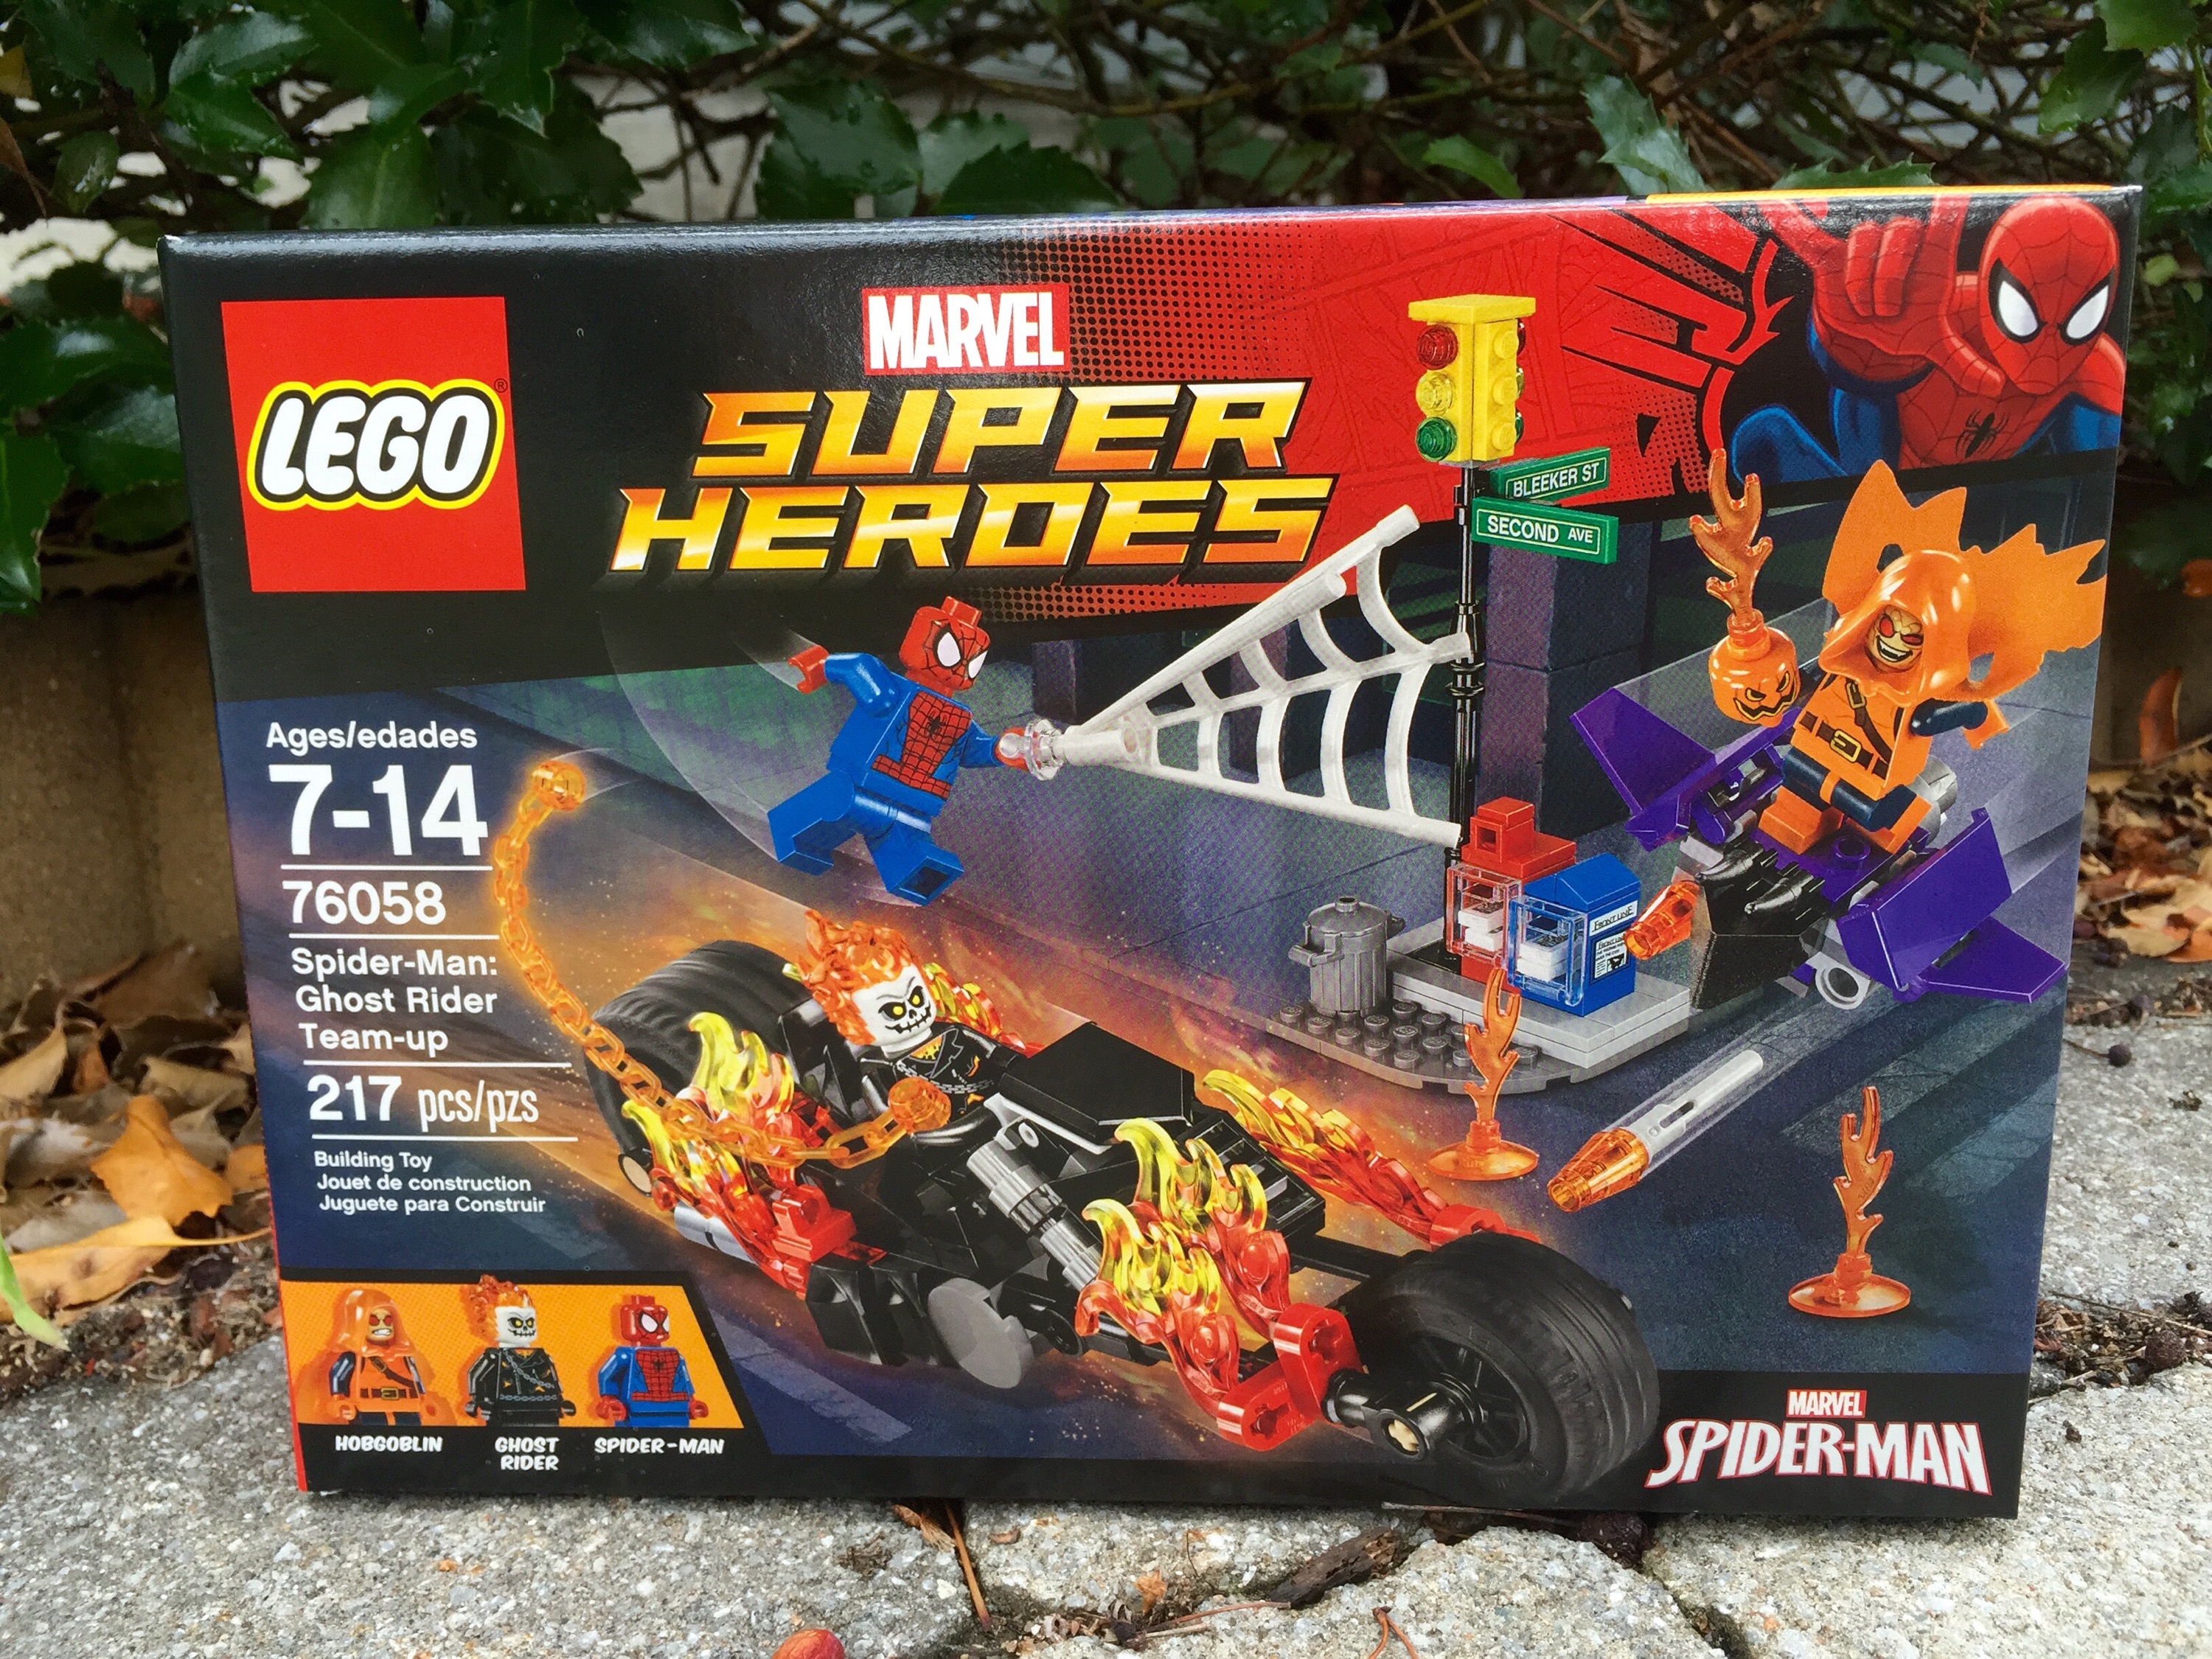 Ghost Rider Lego Sets Deals Clearance, Save 66% | jlcatj.gob.mx